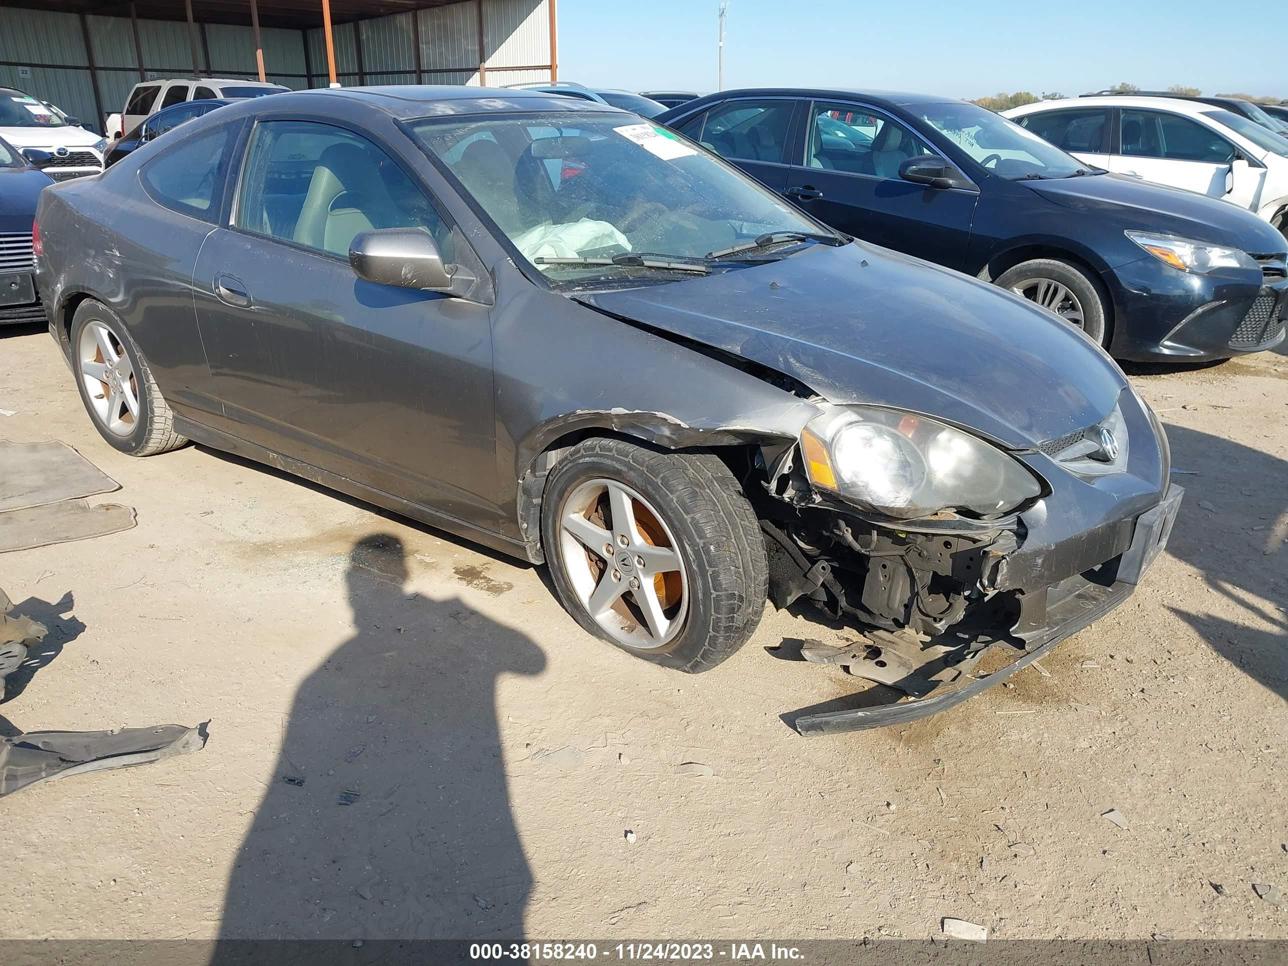 vin: JH4DC53053C007643 JH4DC53053C007643 2003 acura rsx 2000 for Sale in 76247, 3748 Mcpherson Dr, Justin, Texas, USA